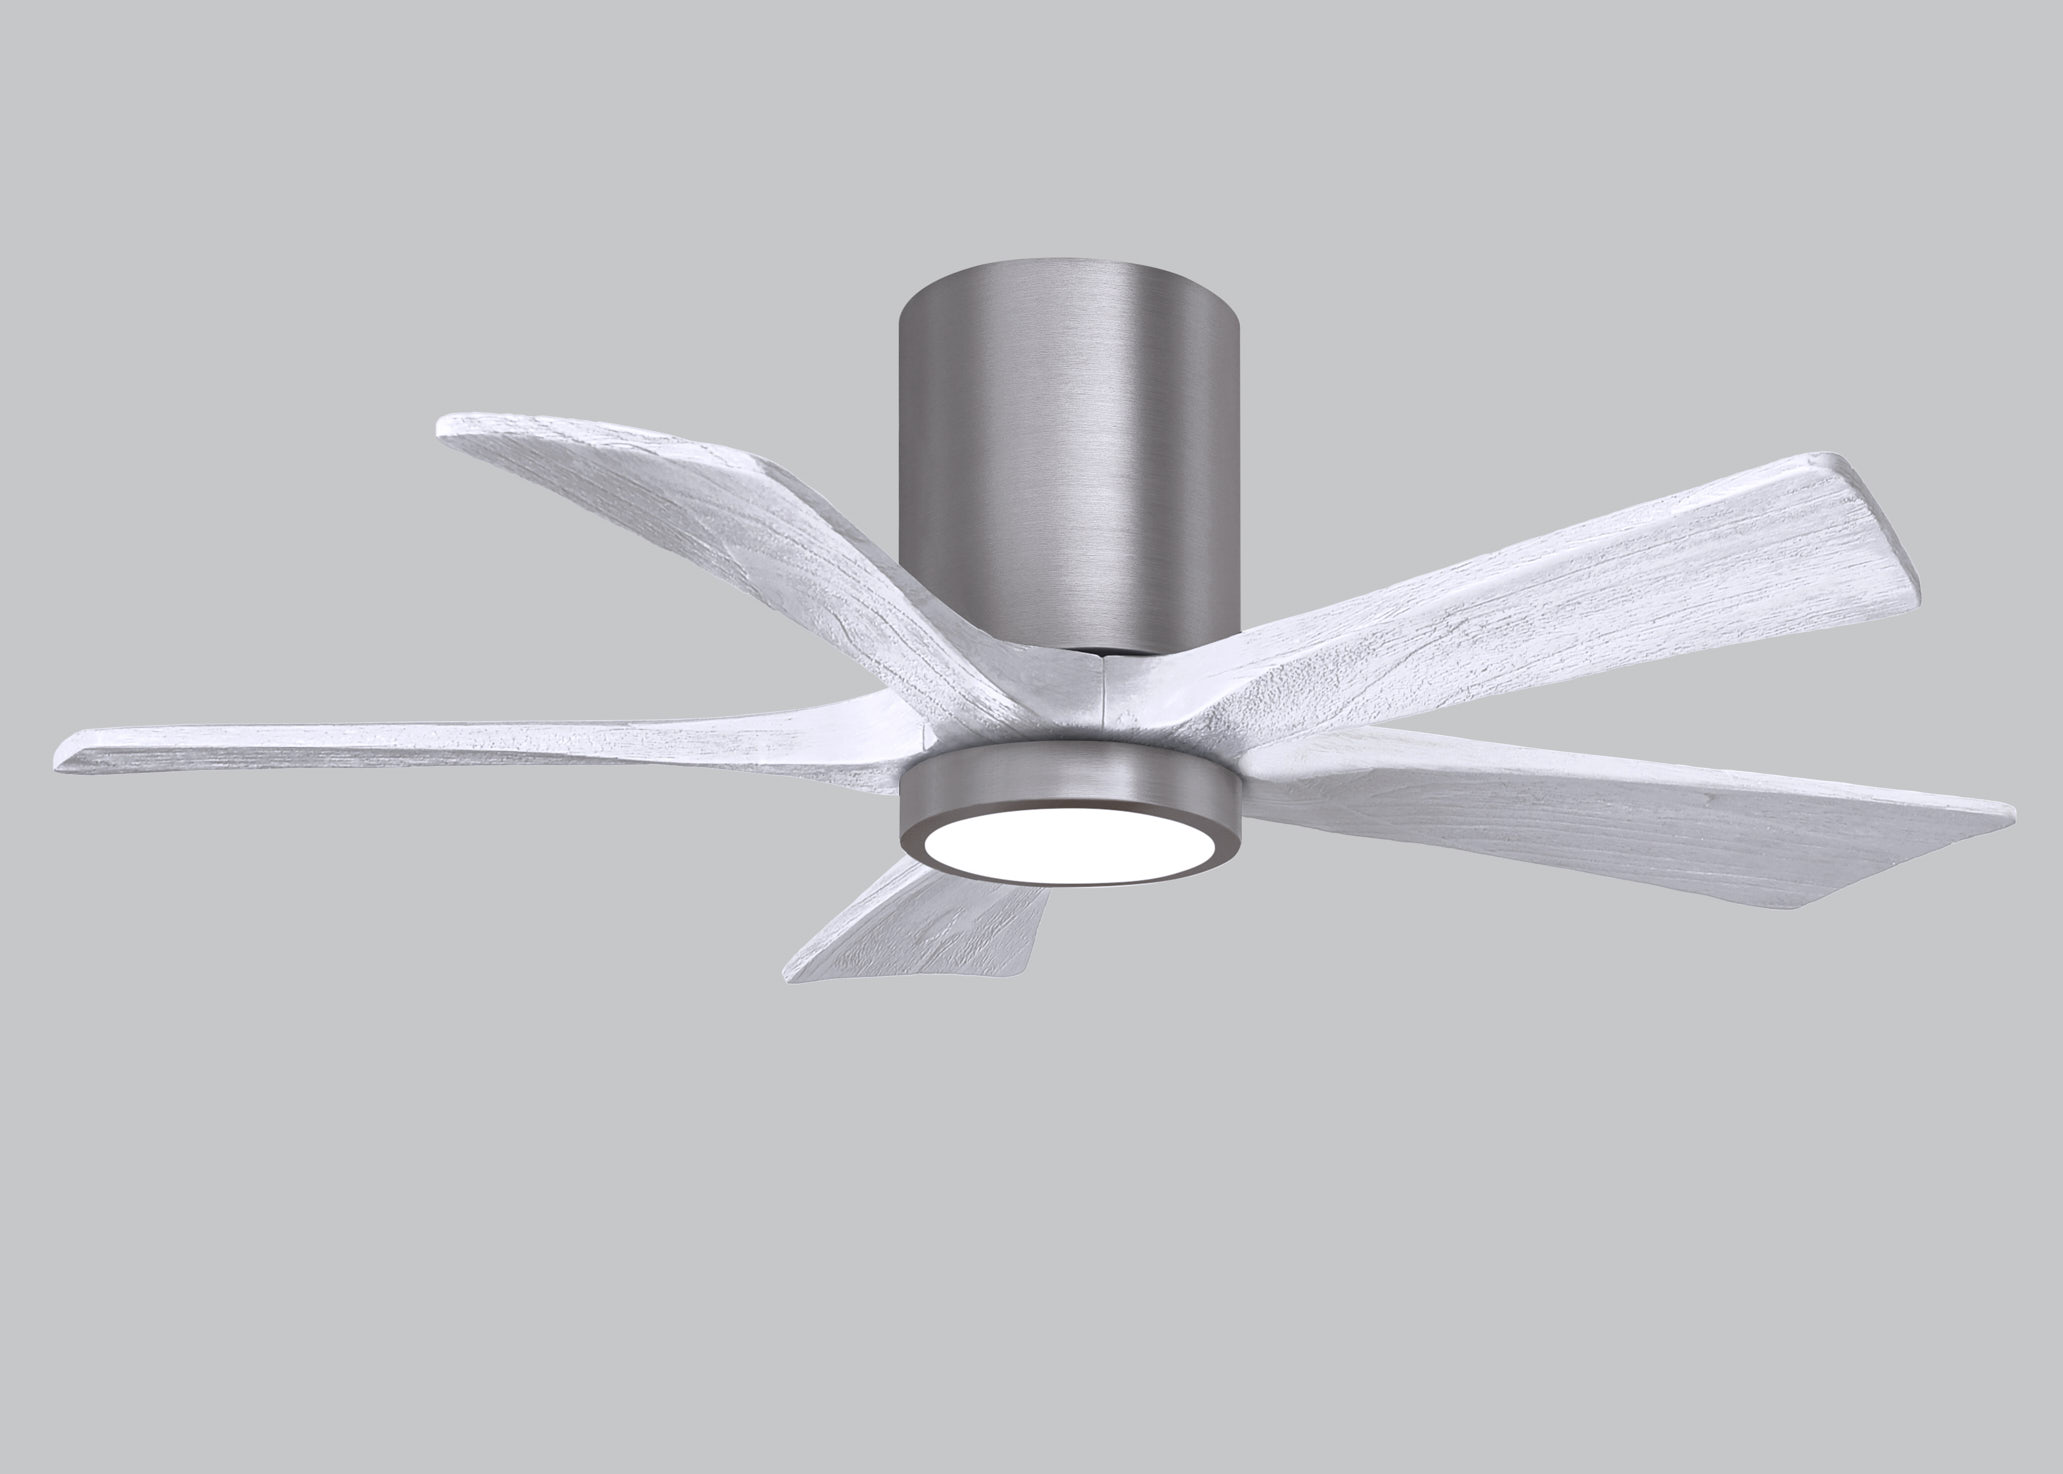 Irene-5HLK 6-speed ceiling fan in brushed pewter finish with 42